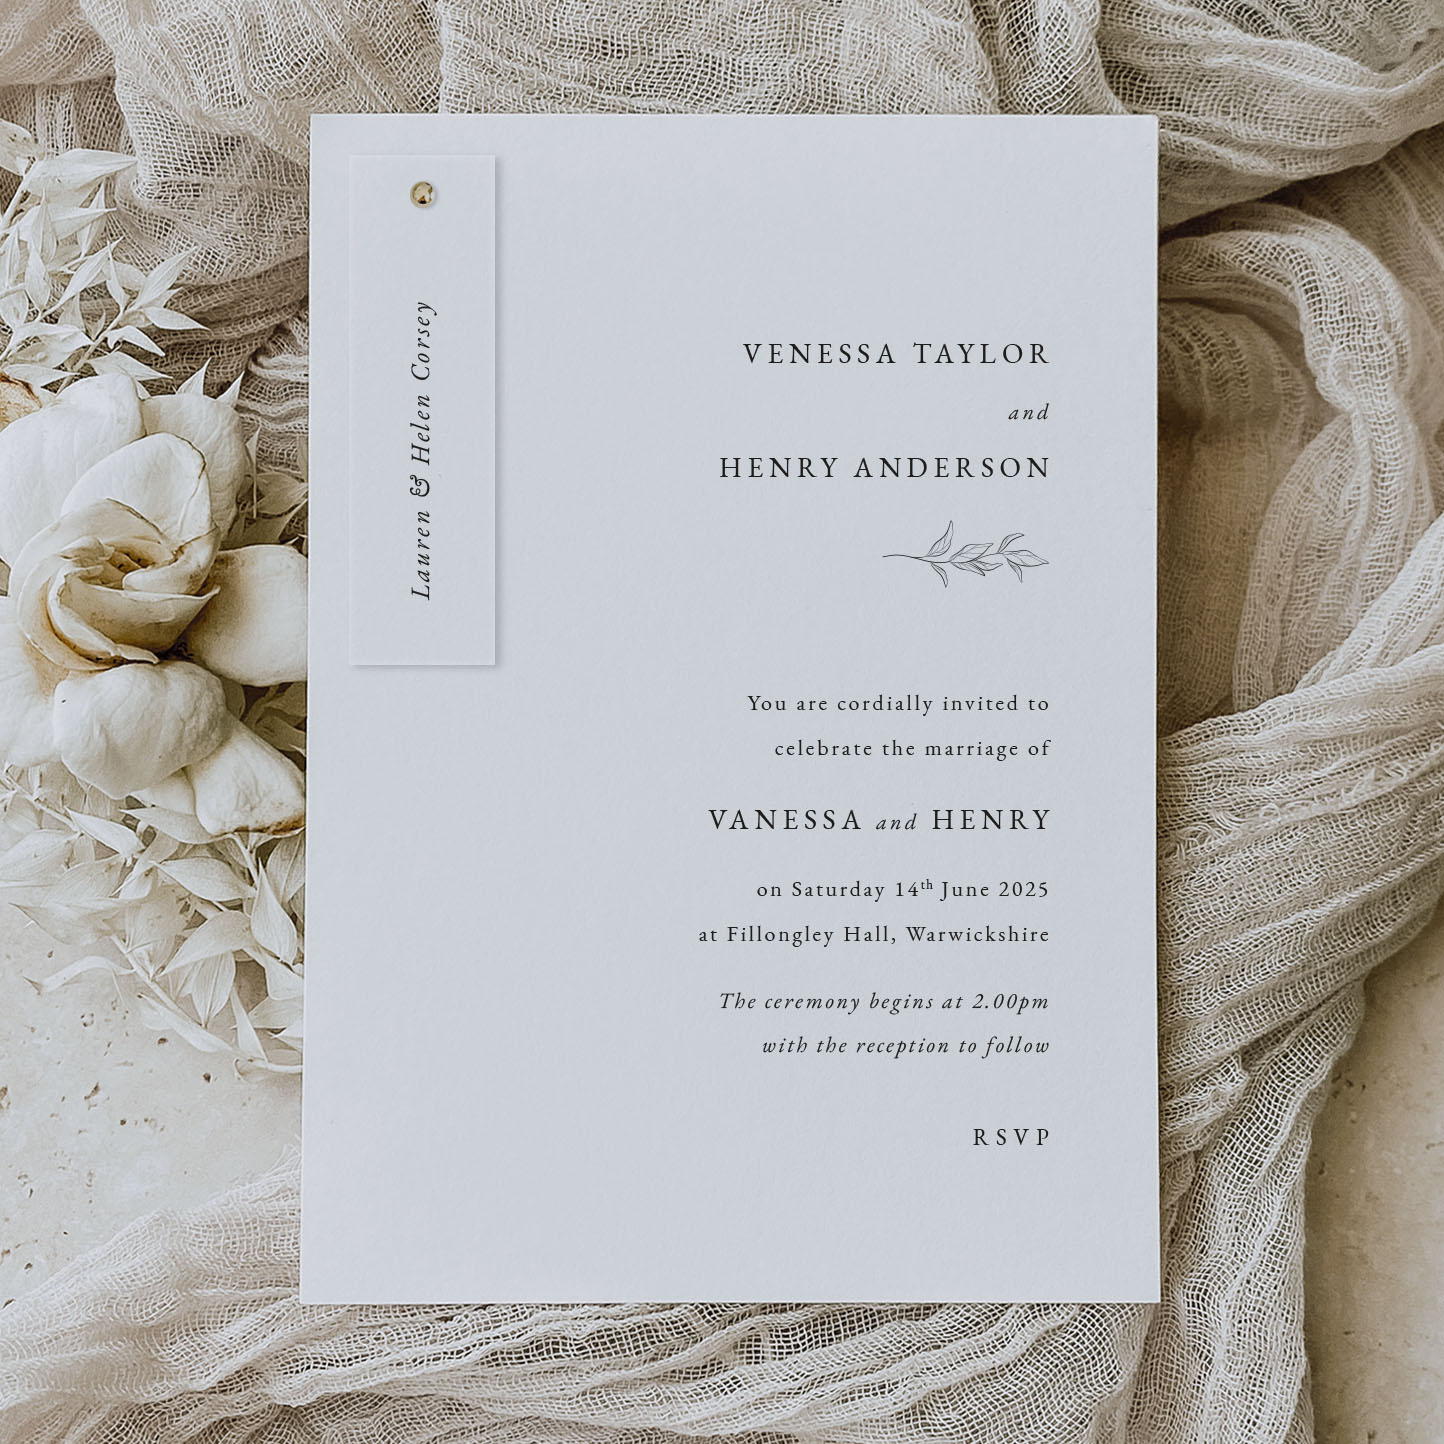 Laurel Leaf - simple modern wedding stationery with leaf motif shown on cream fabric background with a pin holding the guest names on the invitation